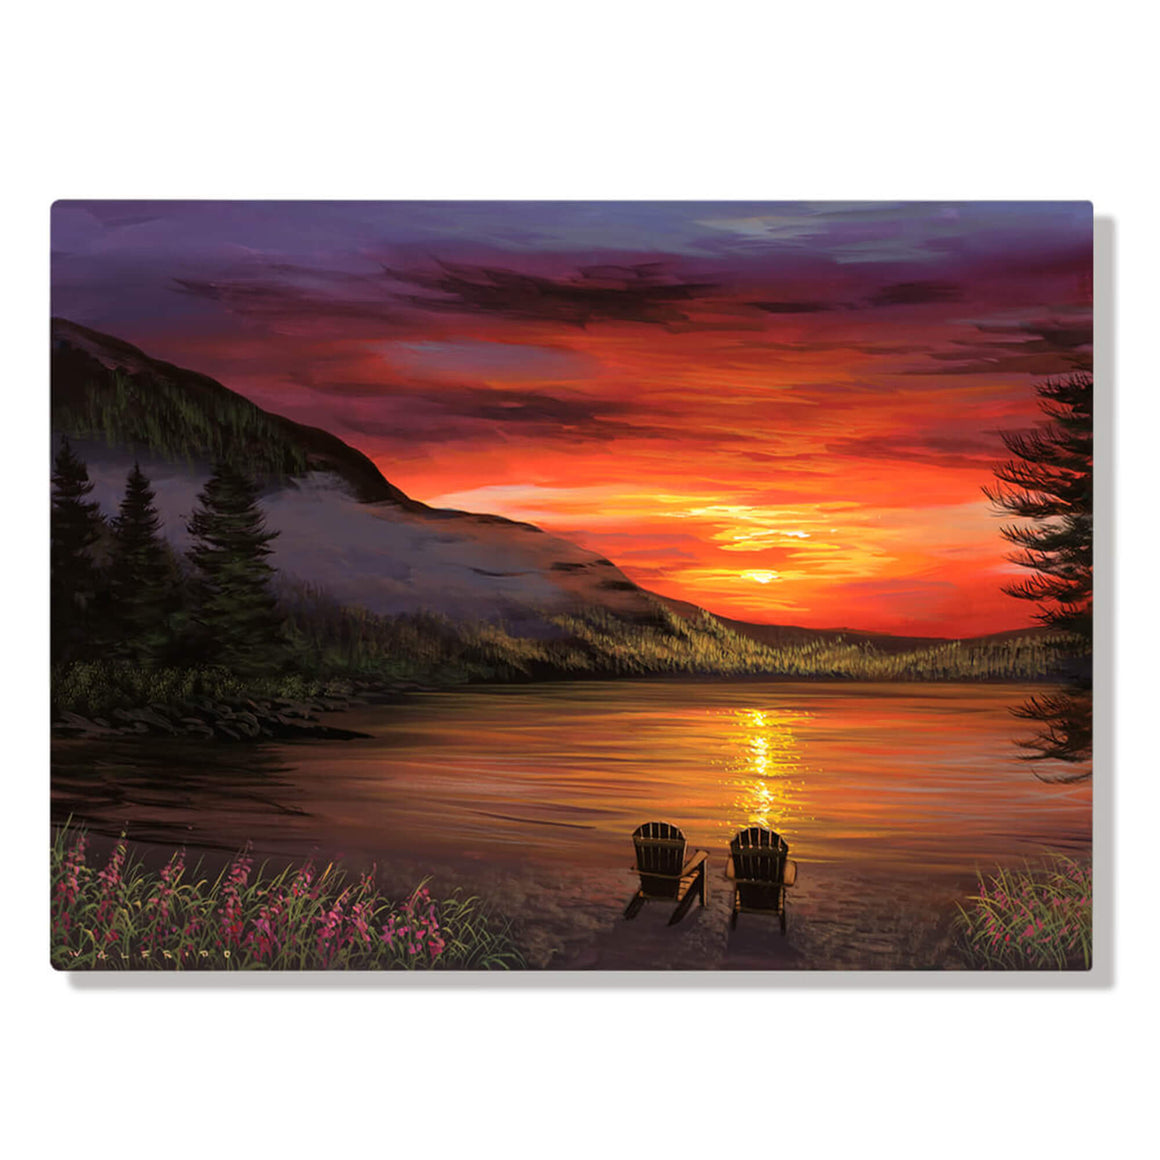 Metal art print of an orange Alaskan sunset over a still mountain lake, with two unoccupied wooden Adirondack chairs in the foreground looking out over the water by Hawaii artist Walfrido Garcia.